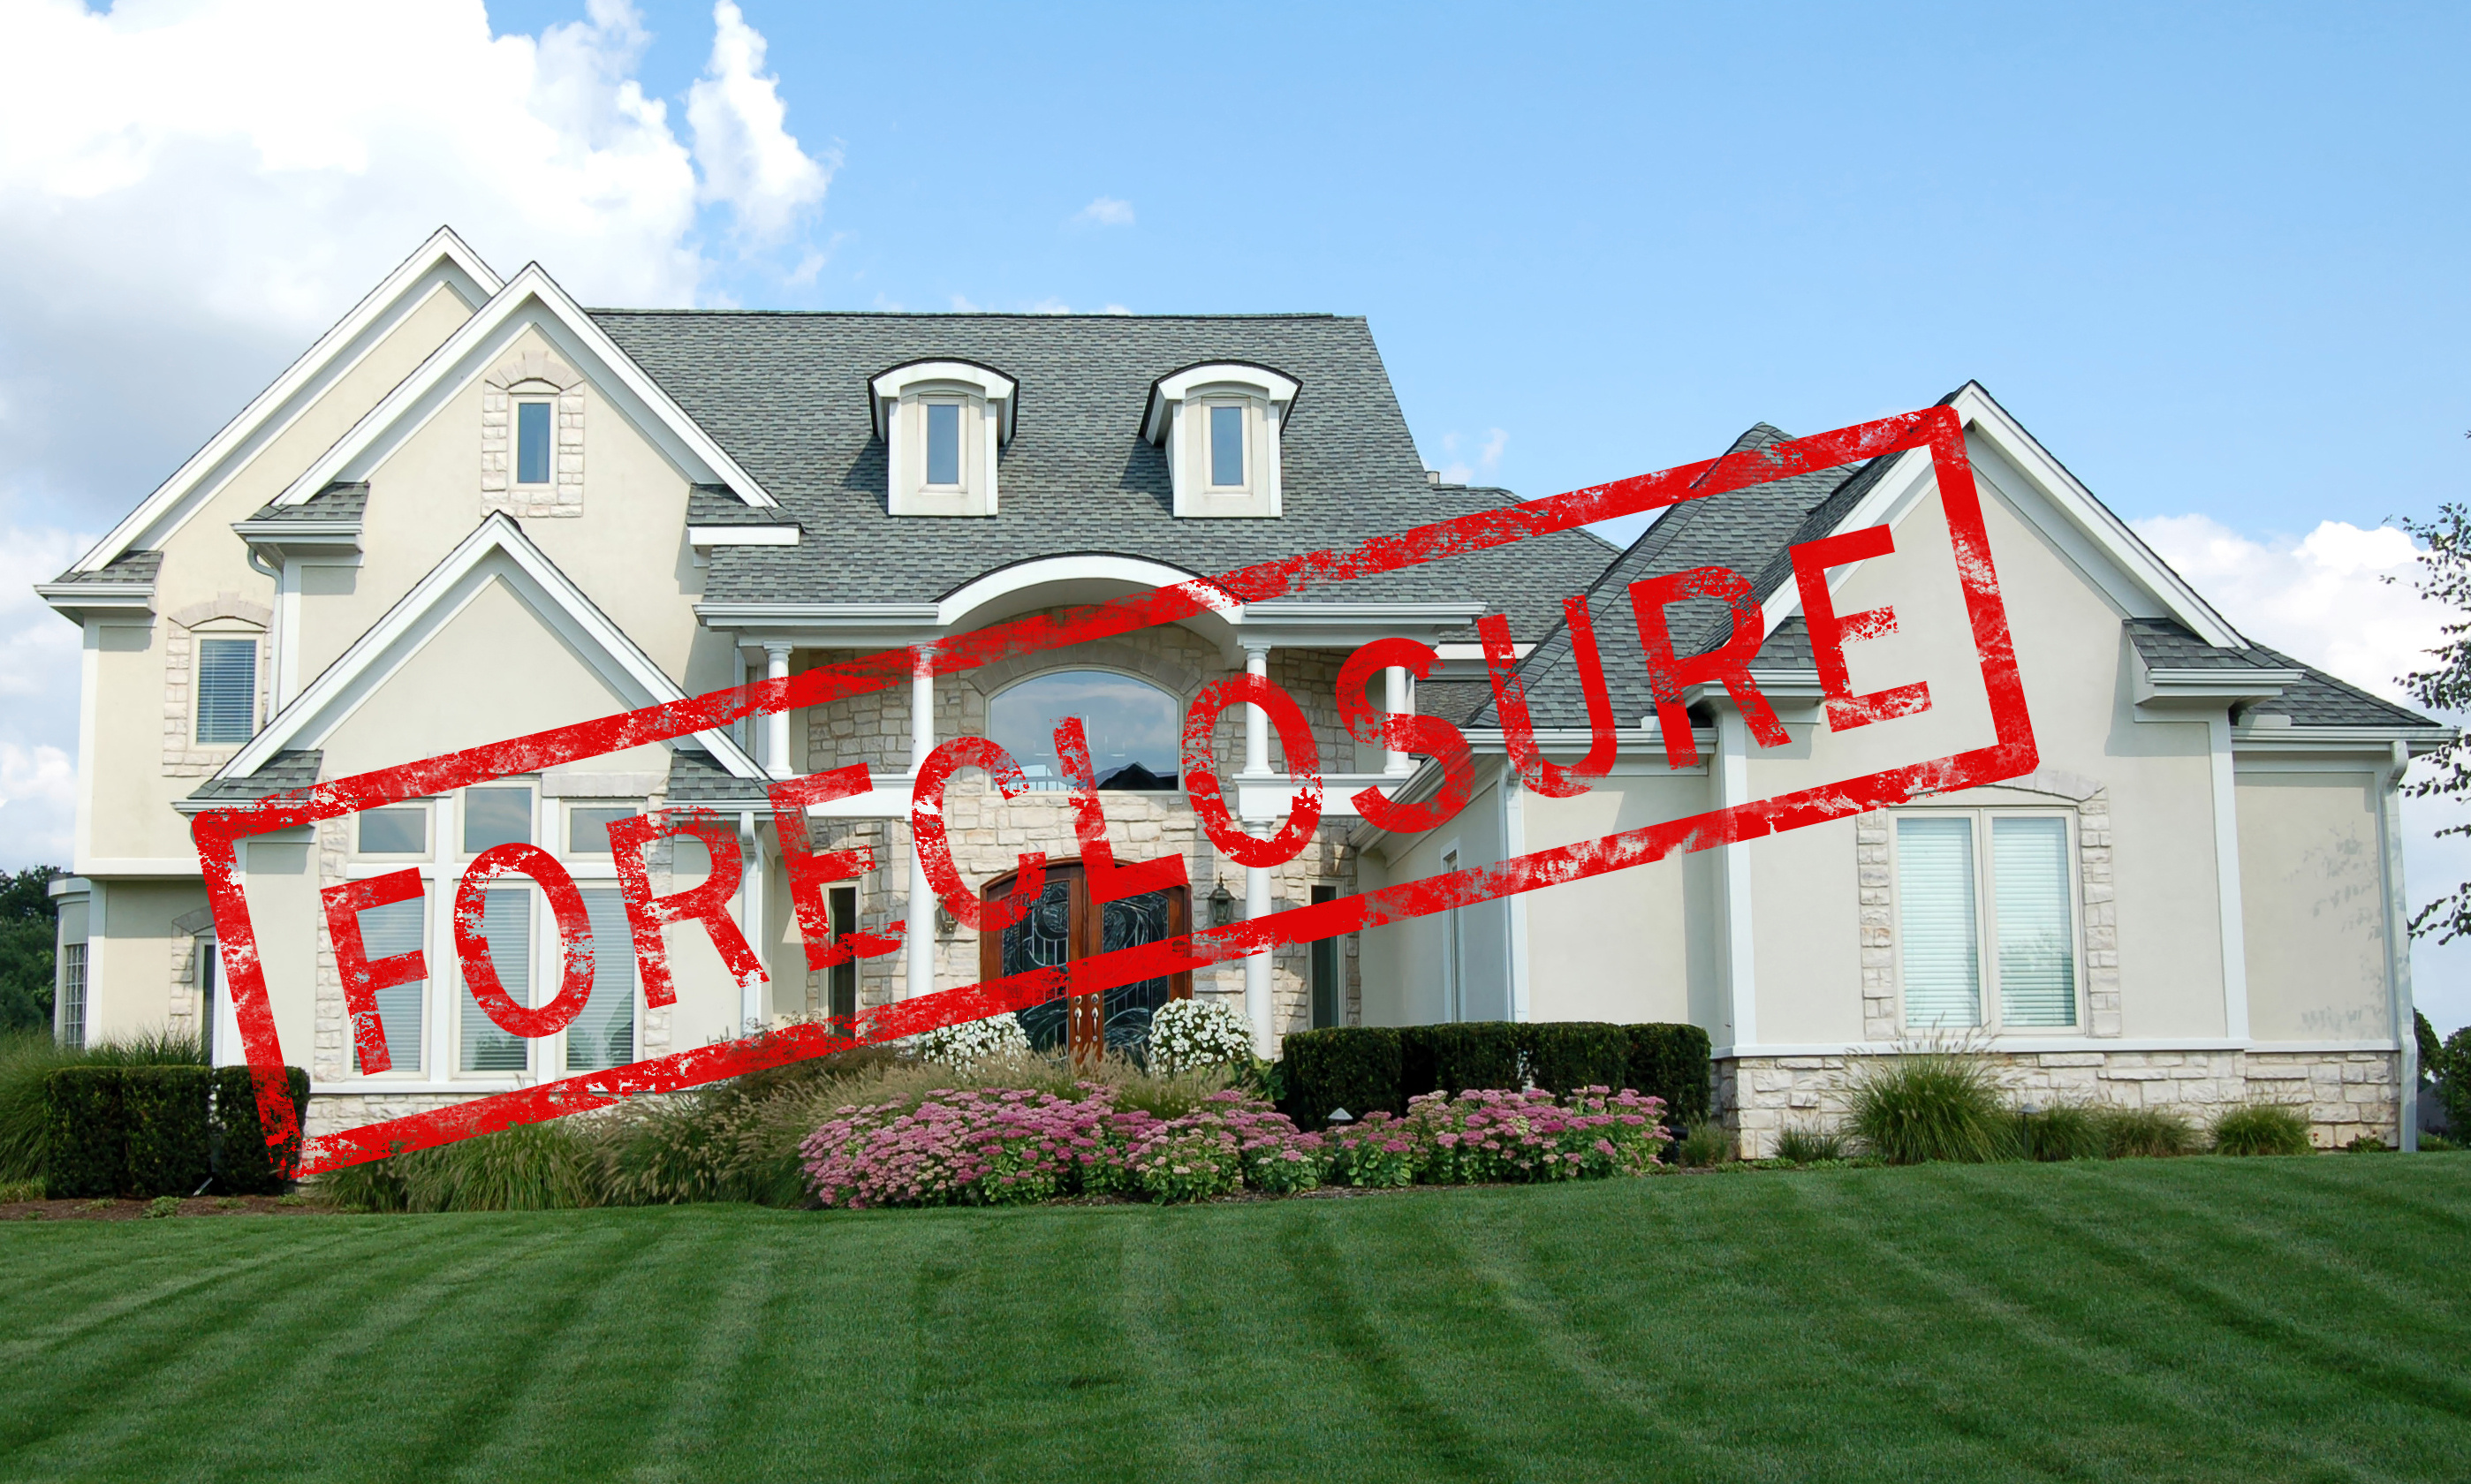 Call Southern Star  Real Estate Services when you need appraisals regarding Paulding foreclosures